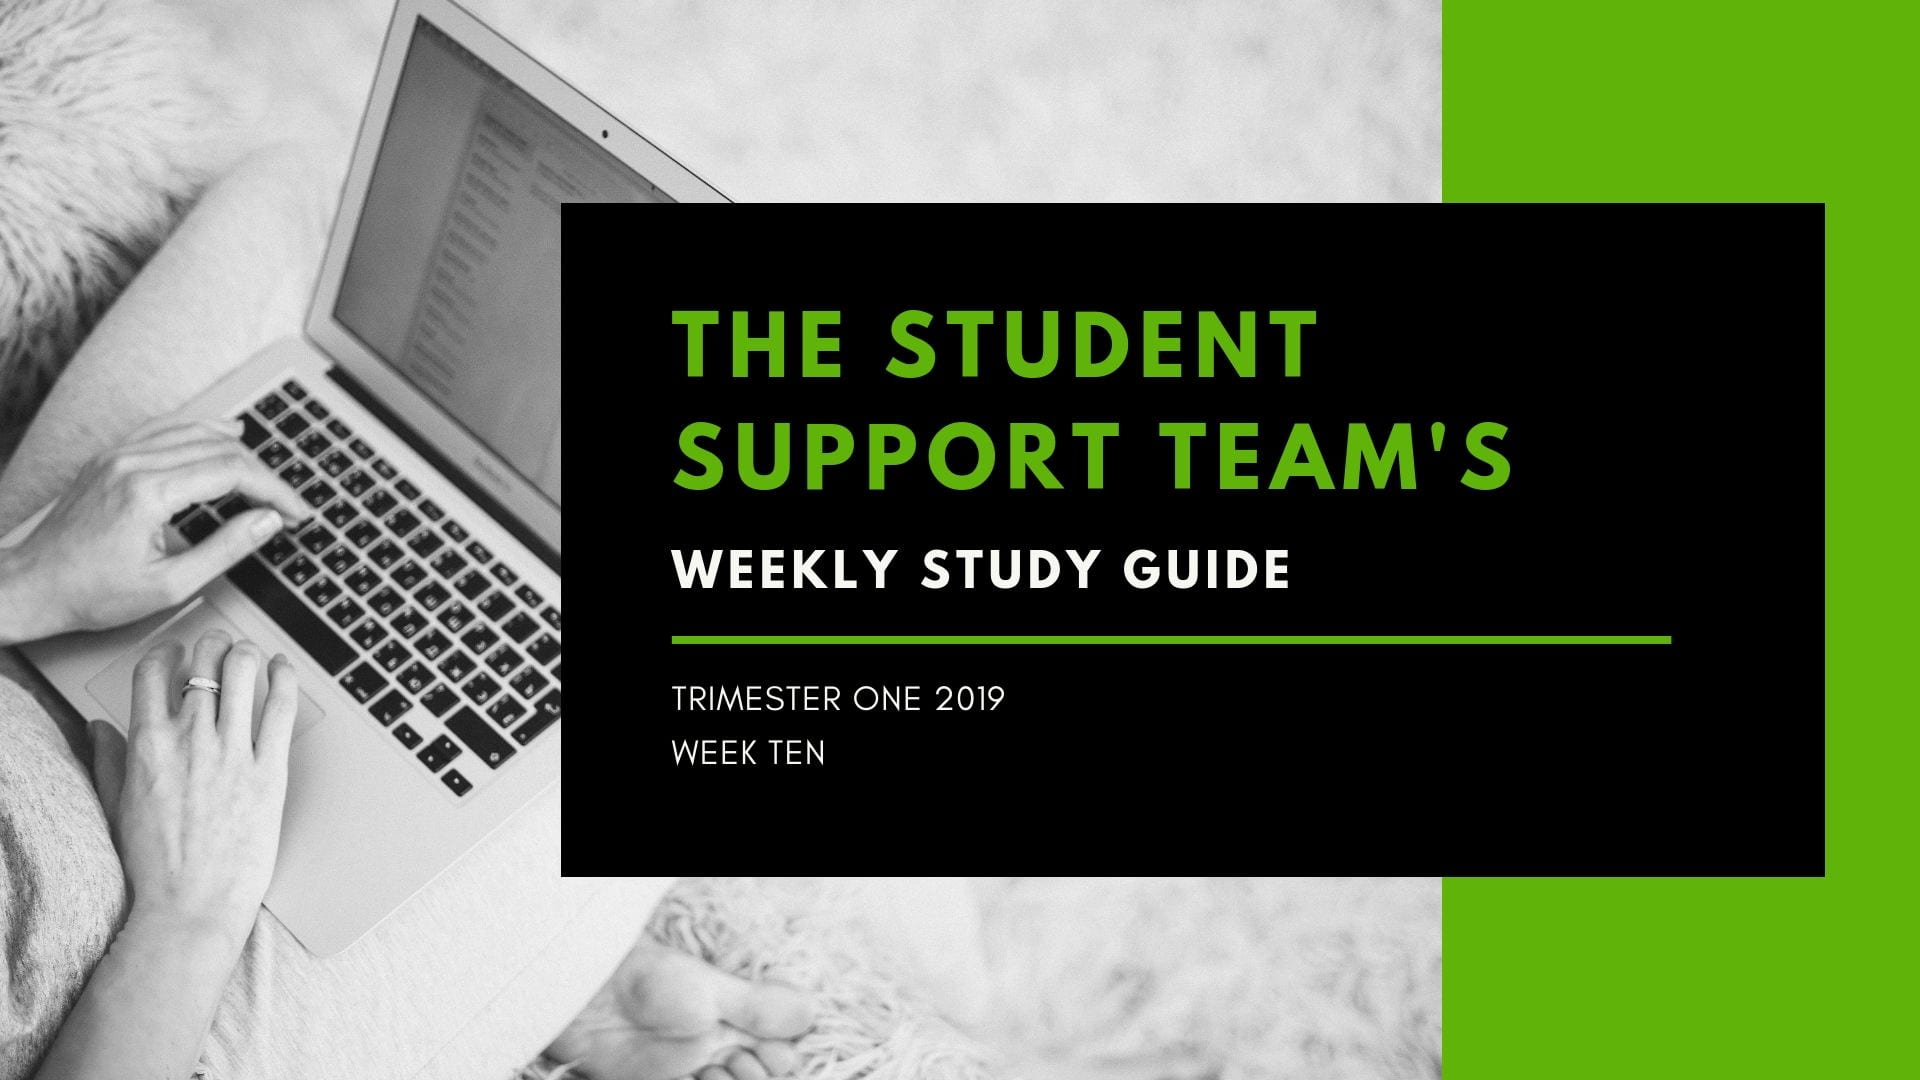 The Student Support Team’s Weekly Study Guide: Week Ten; Get Study Tips and Tricks